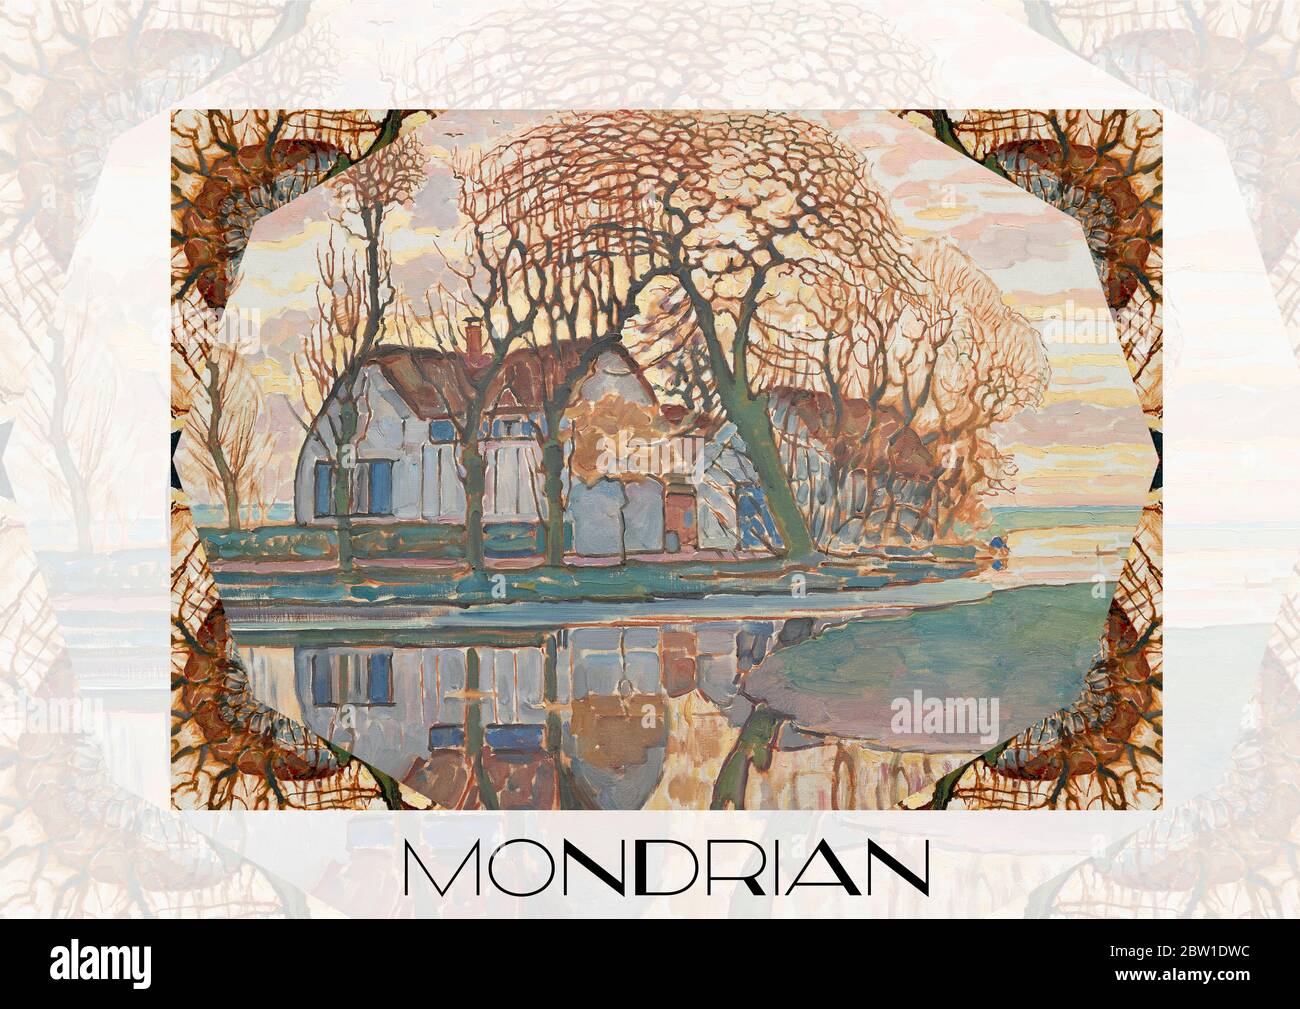 The Farm near Duivendrecht by Piet Mondrian is a work of art held by the Art Institute of Chicago. A lovely pastoral scene. Stock Photo